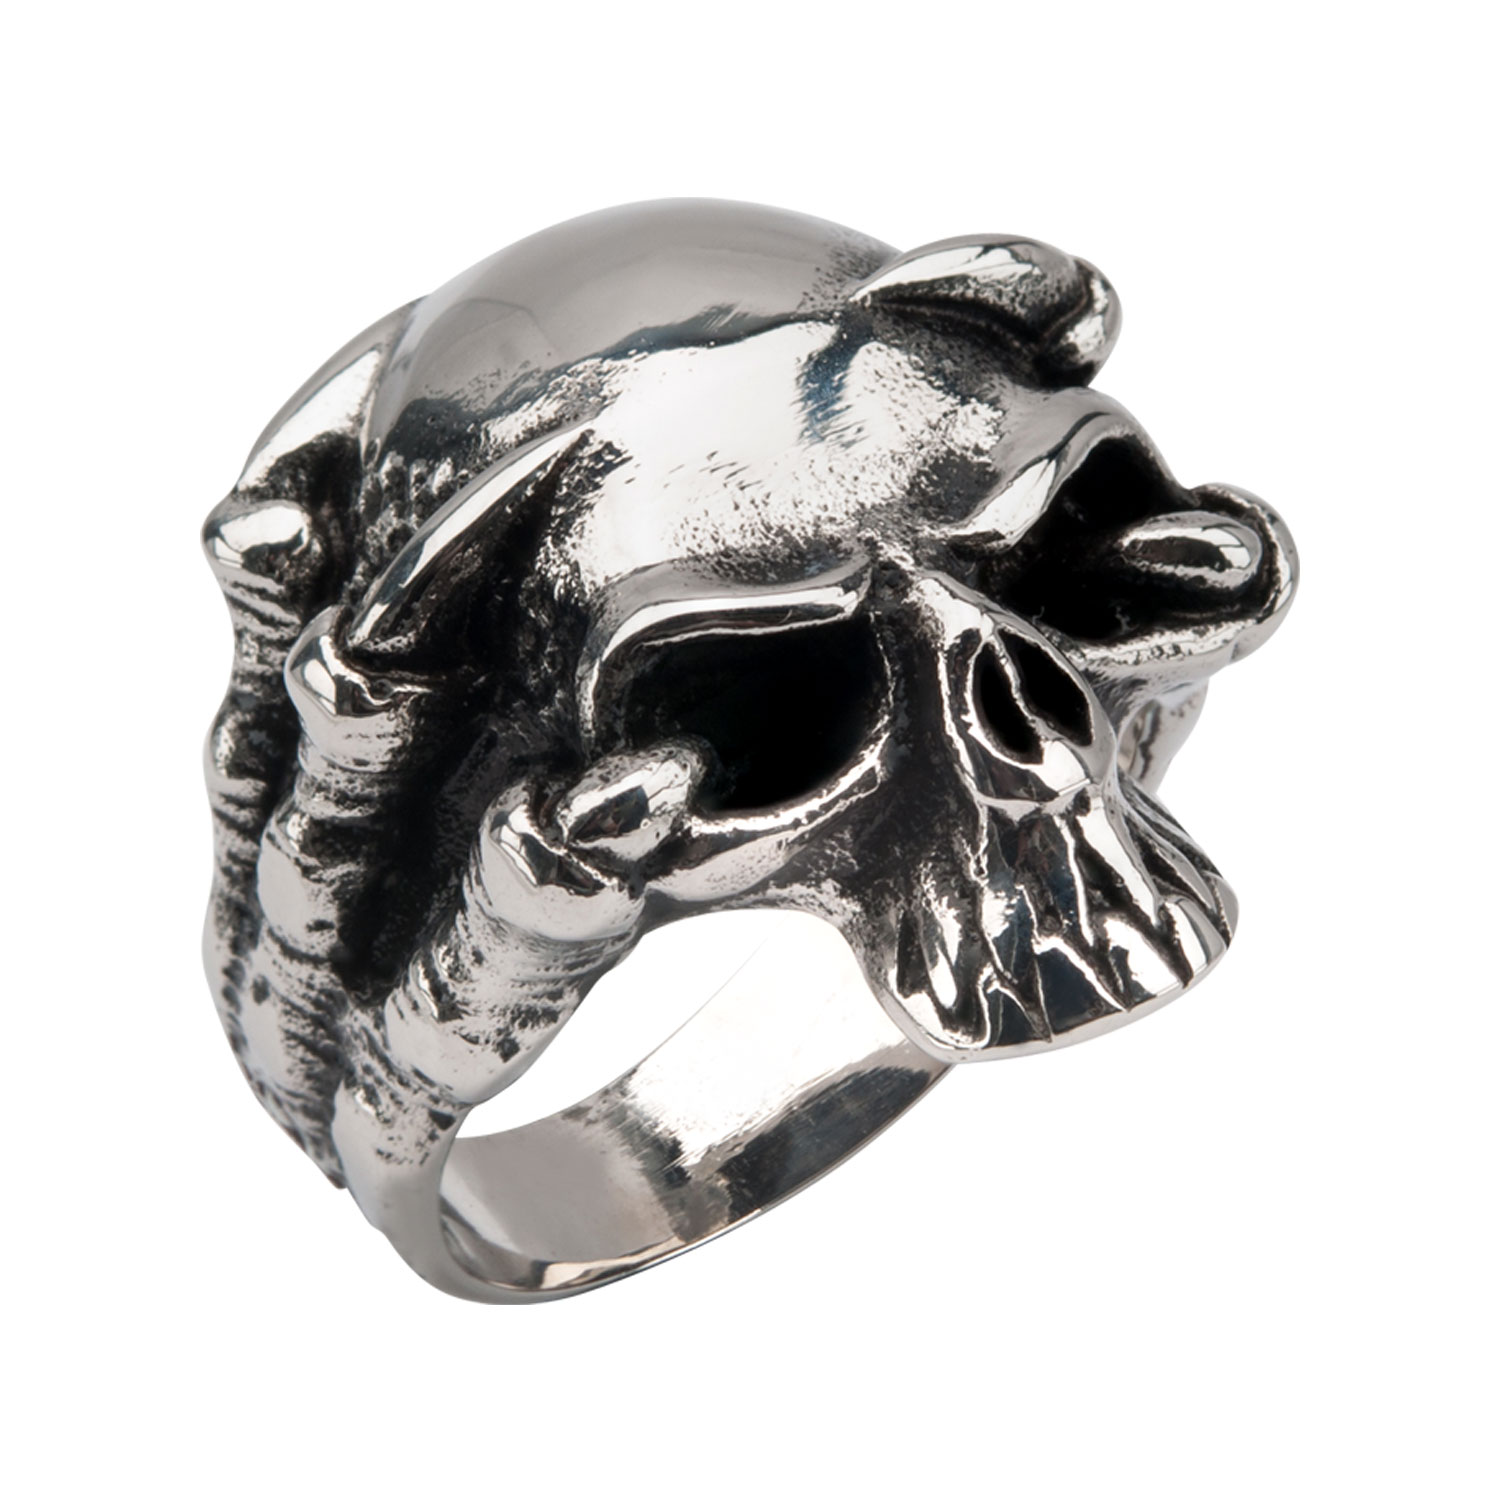 Black Oxidized Skull Ring with Claws Morin Jewelers Southbridge, MA